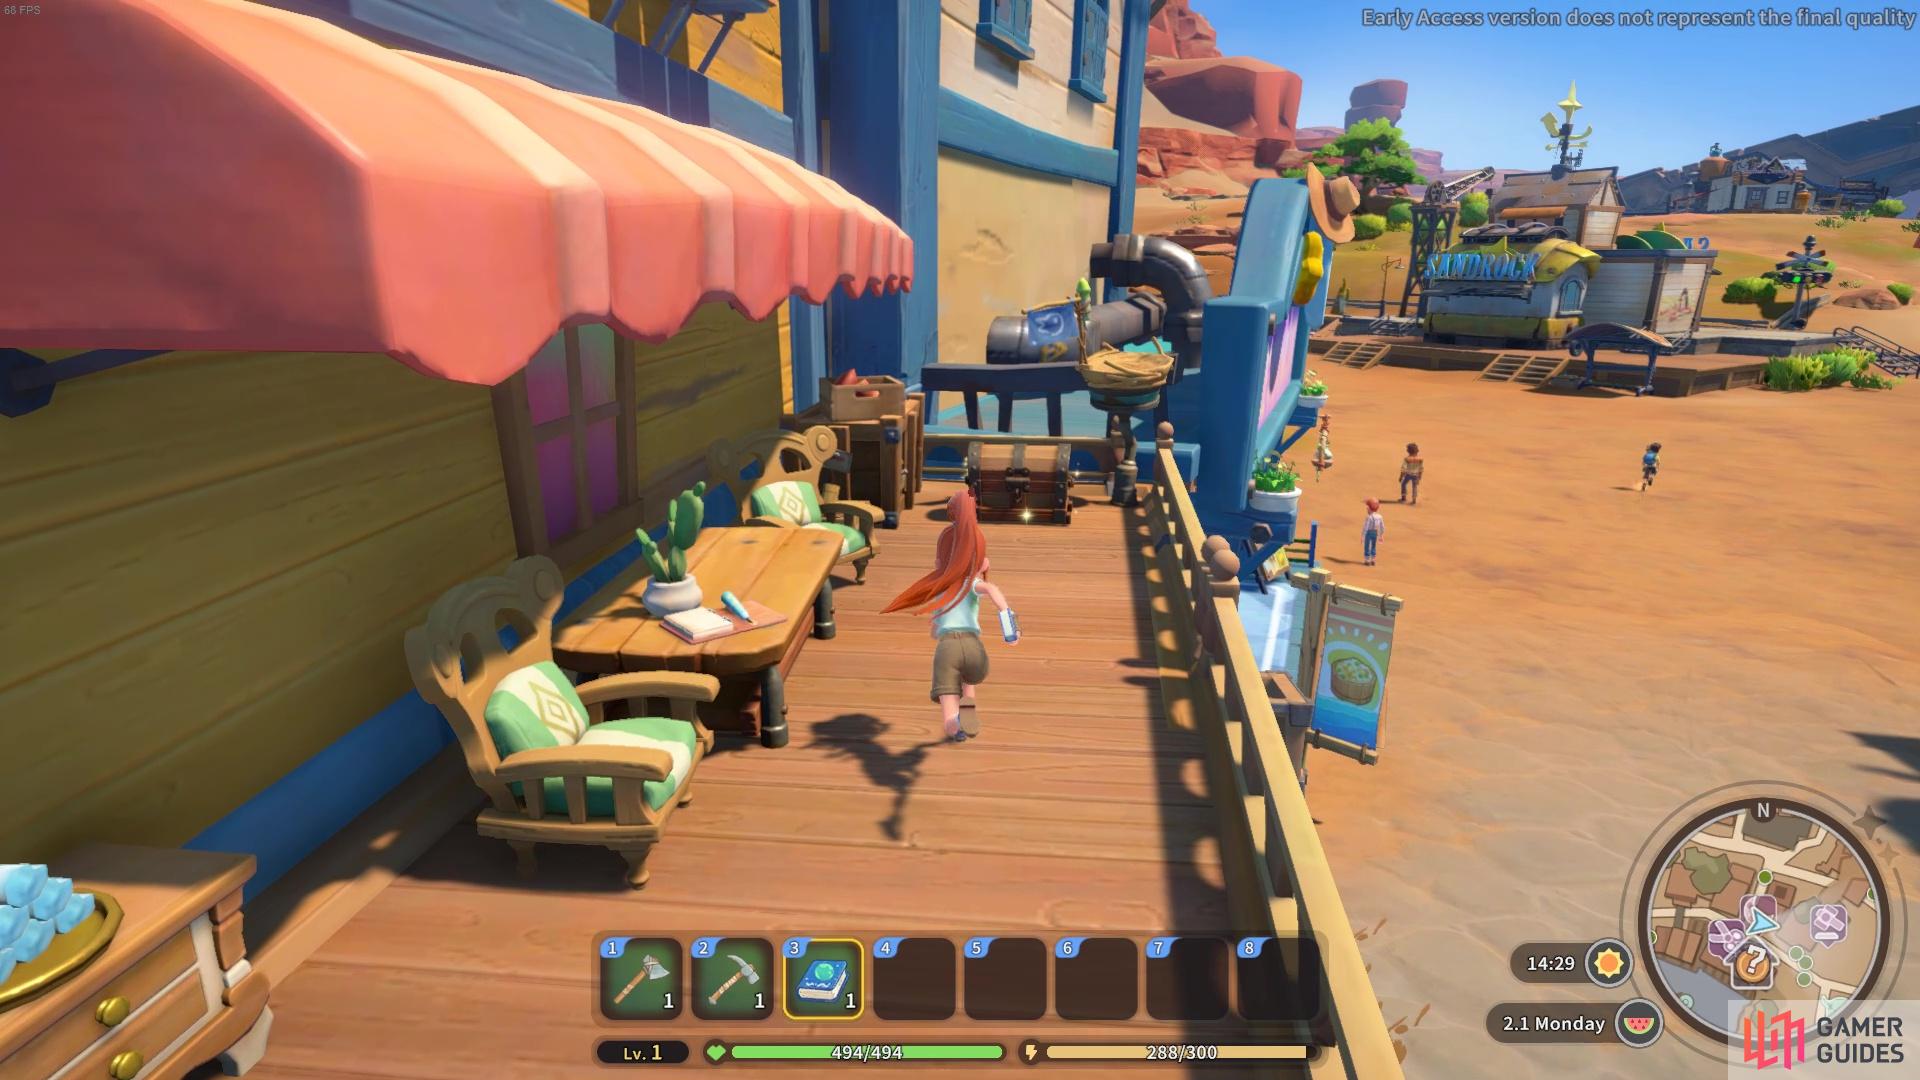 There is a chest found on the balcony of the Blue Moon Saloon